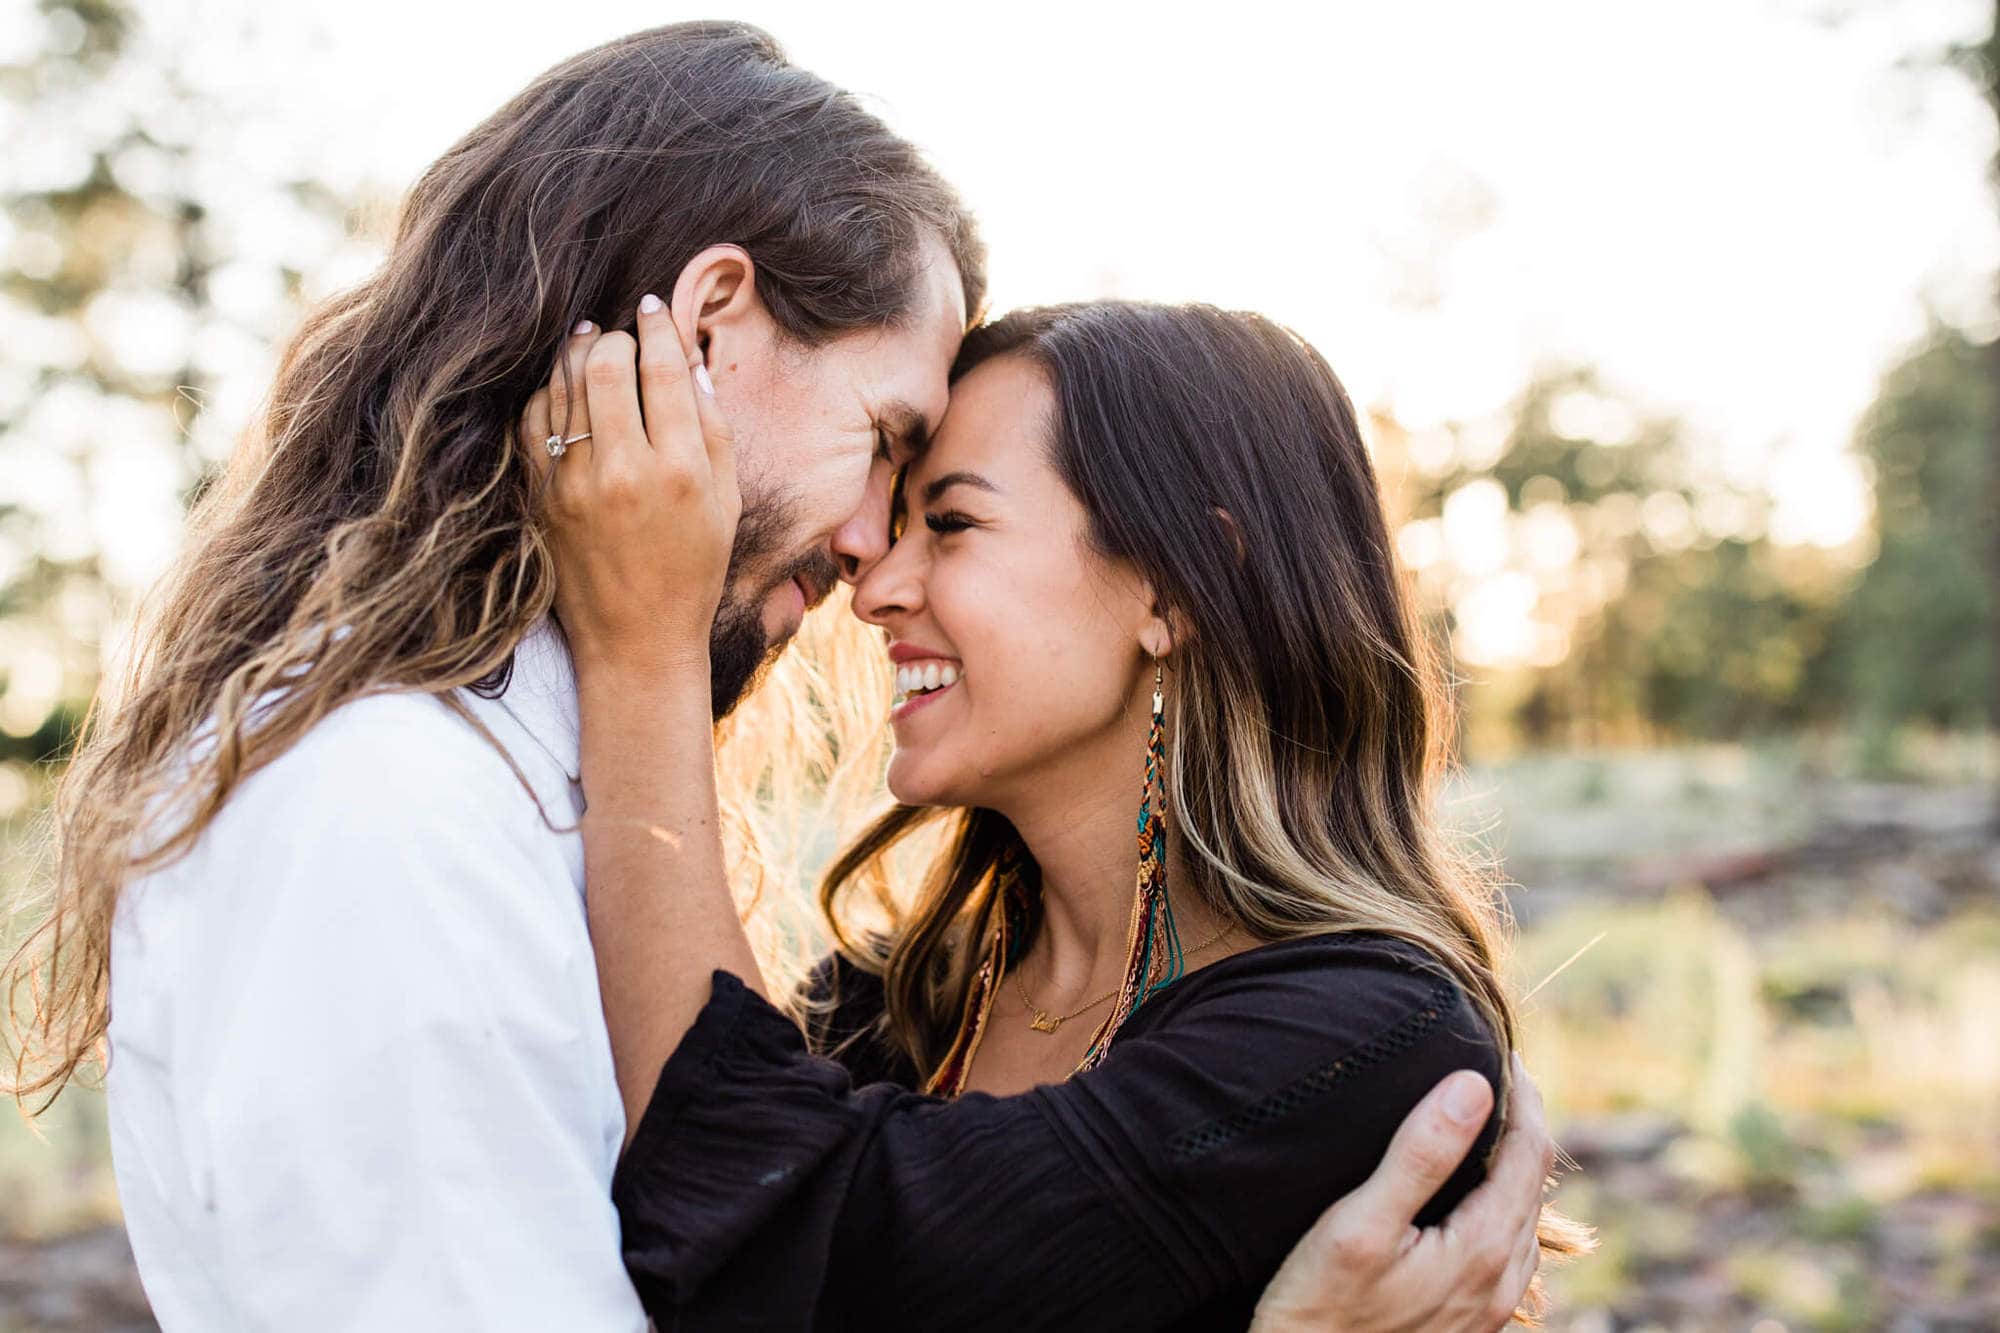 The couple laughs during their rad forest engagement session.